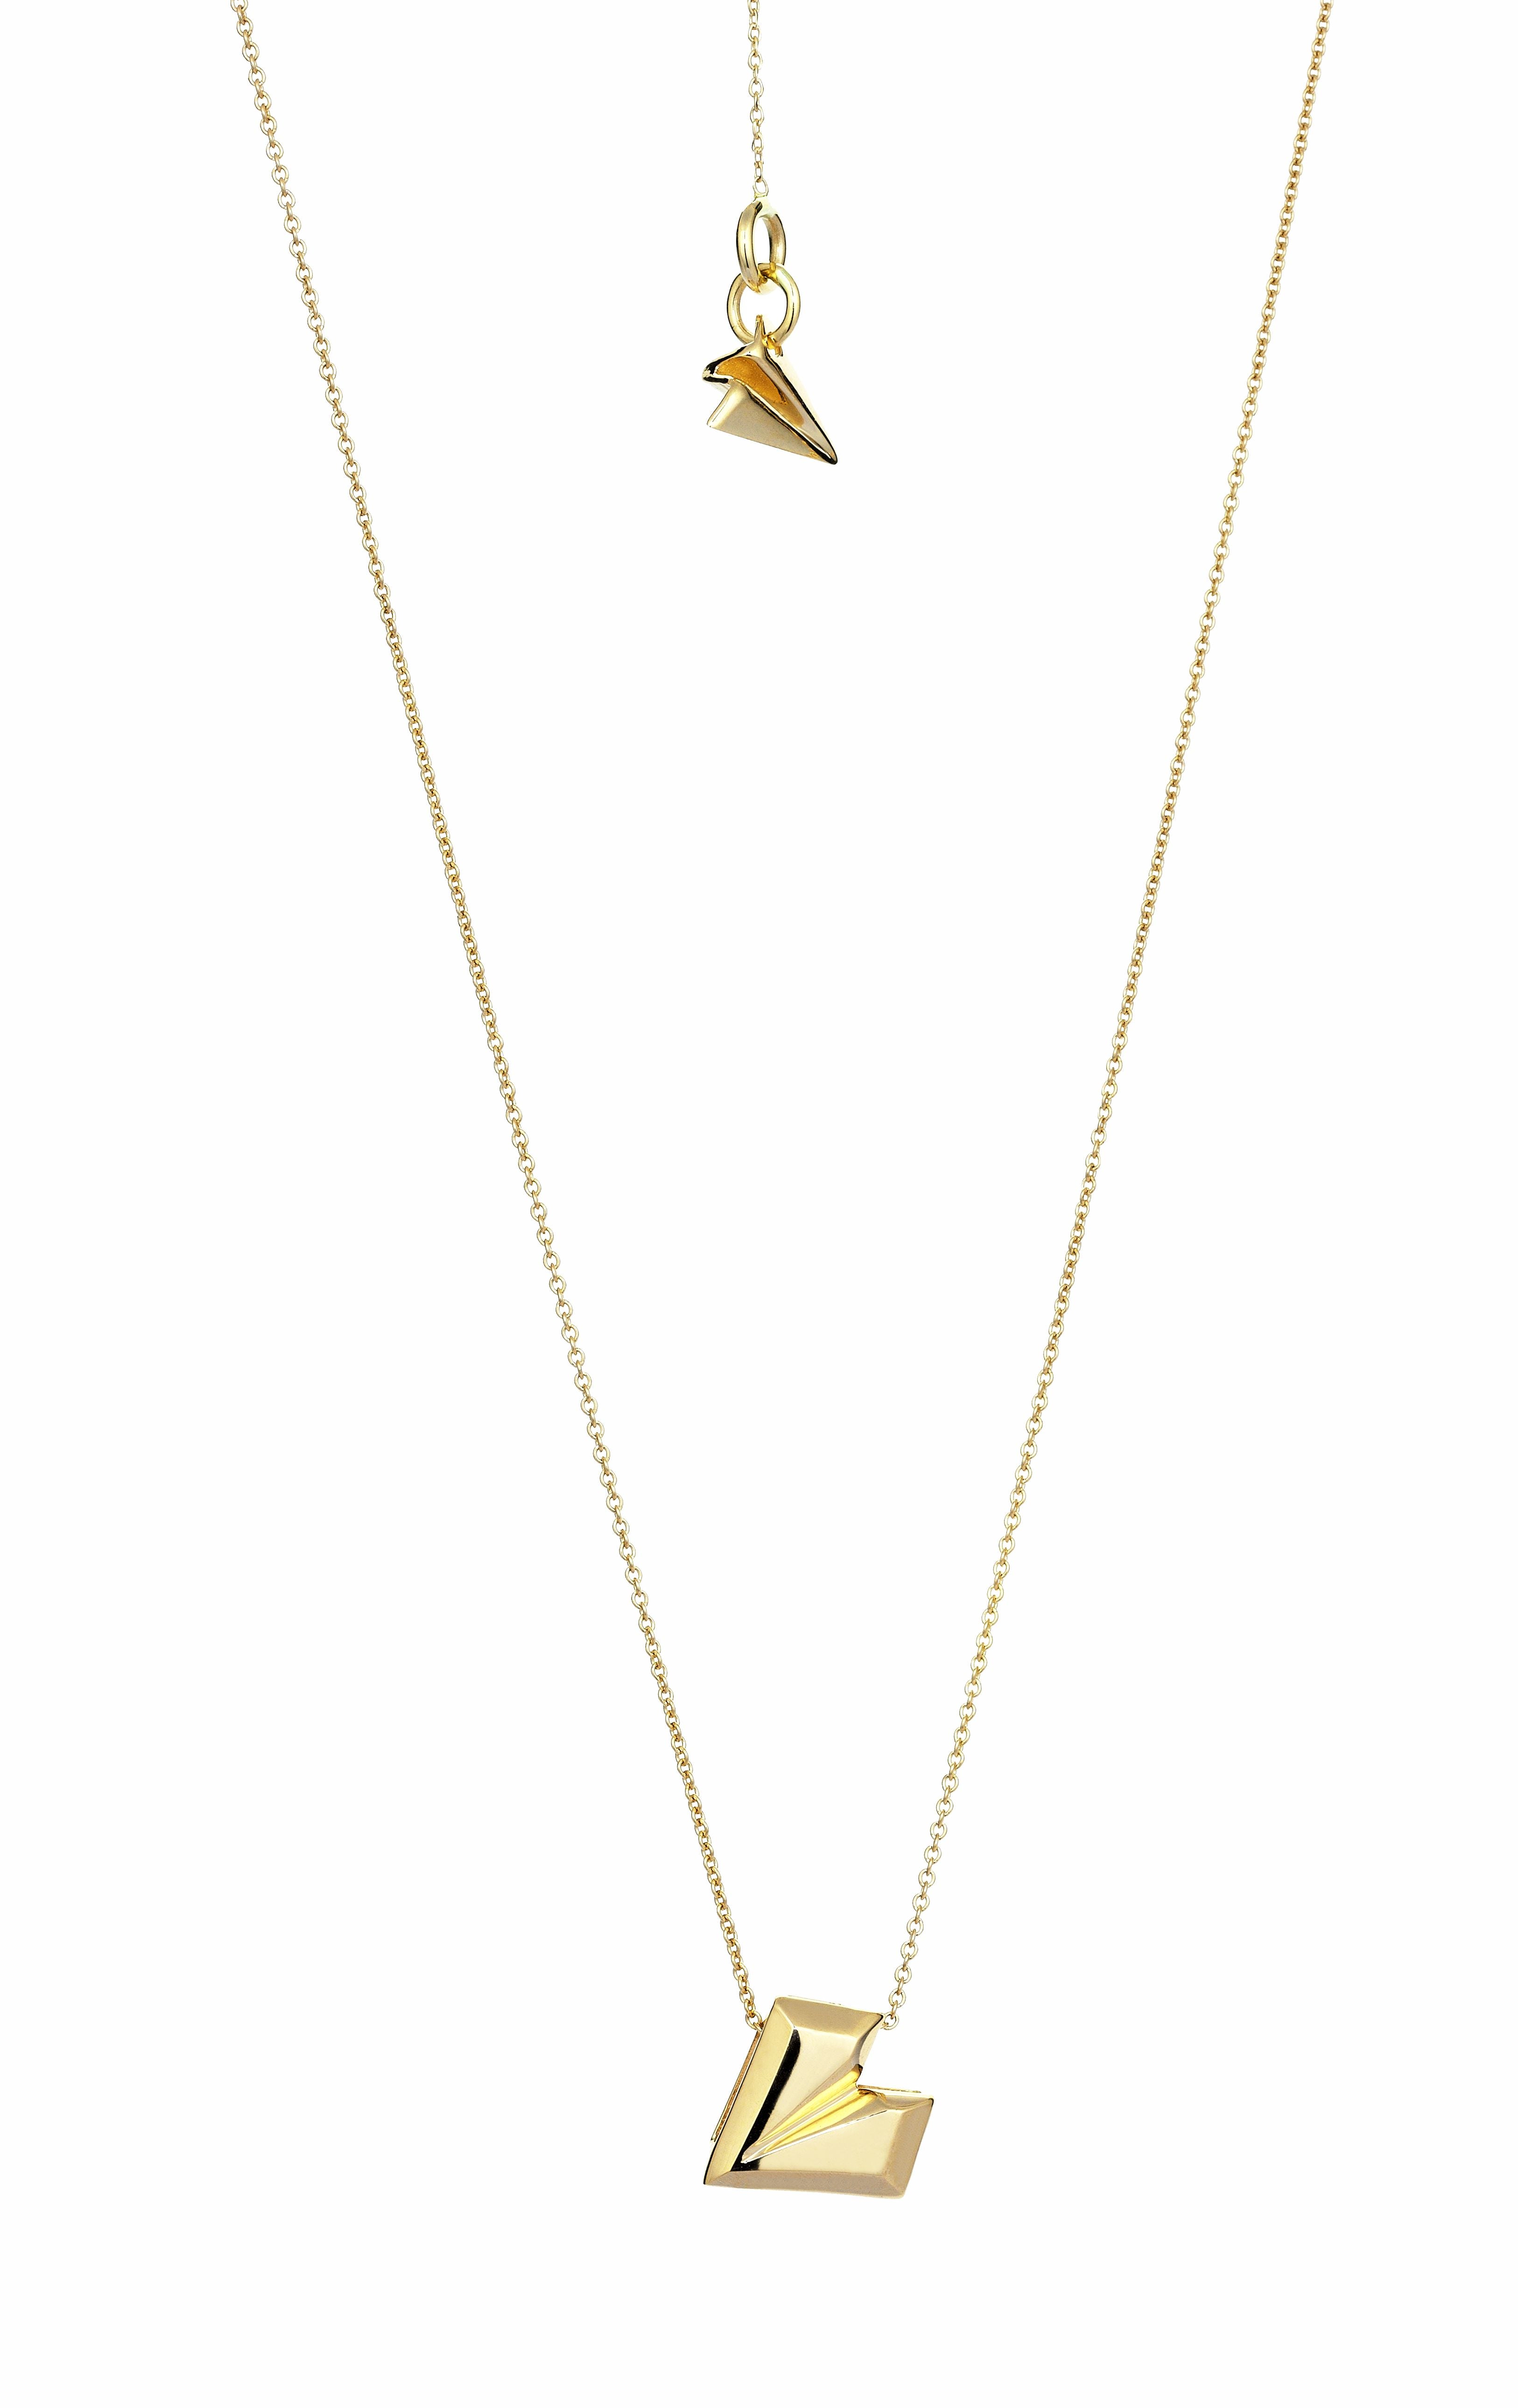 Origami Love Little Necklace in Yellow Gold - Her Story Shop